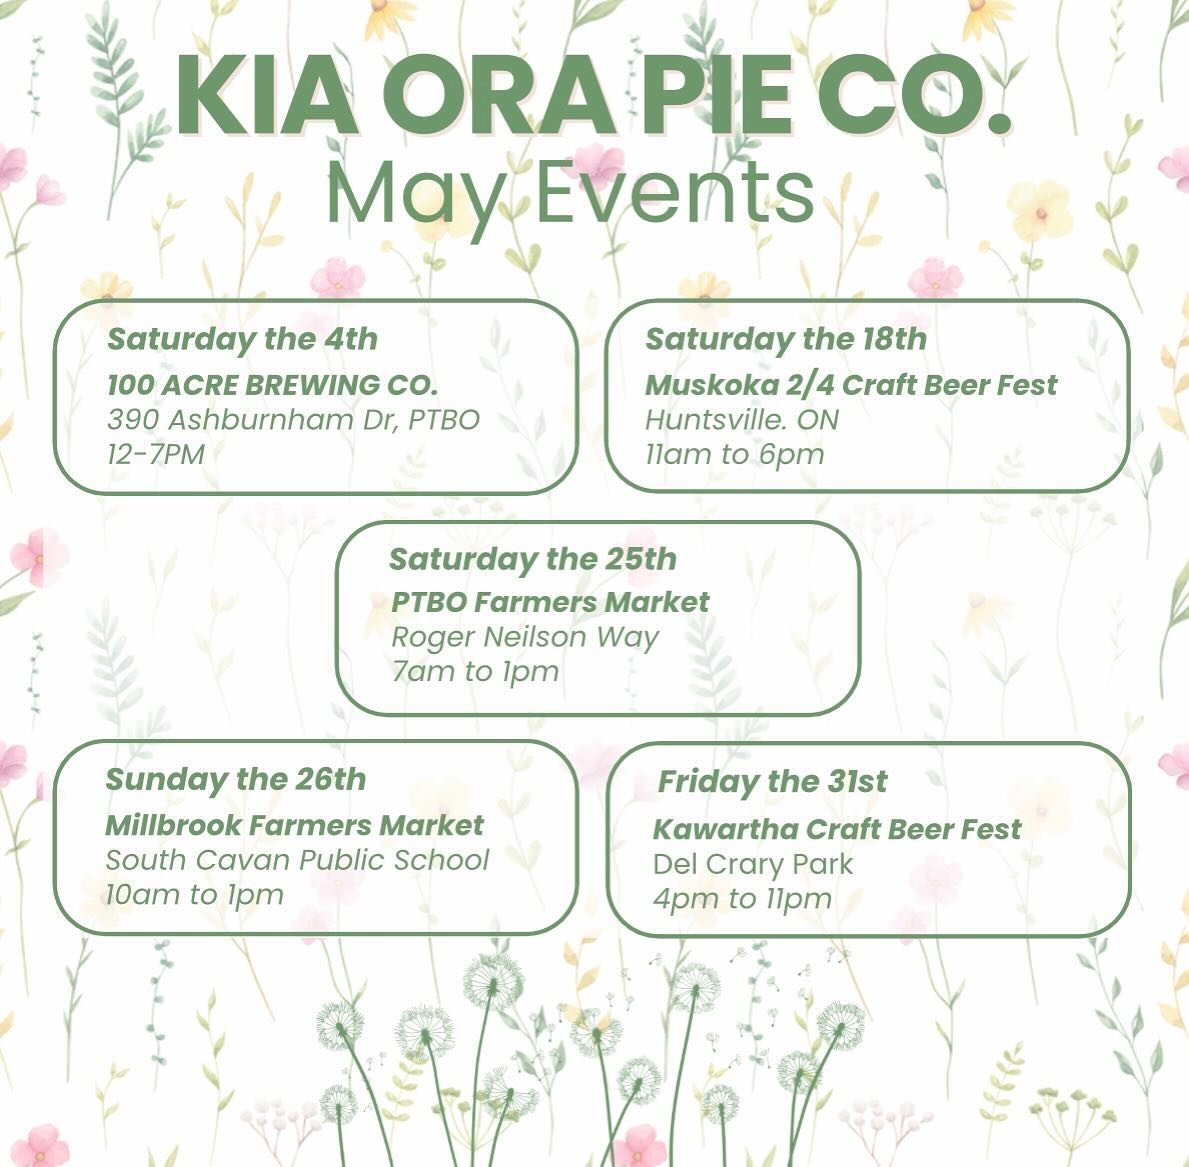 Hey Pie People!
This is where to find us in the month of May. Need some pies for your freezer in the meantime? Place an order online for curb side pick up.